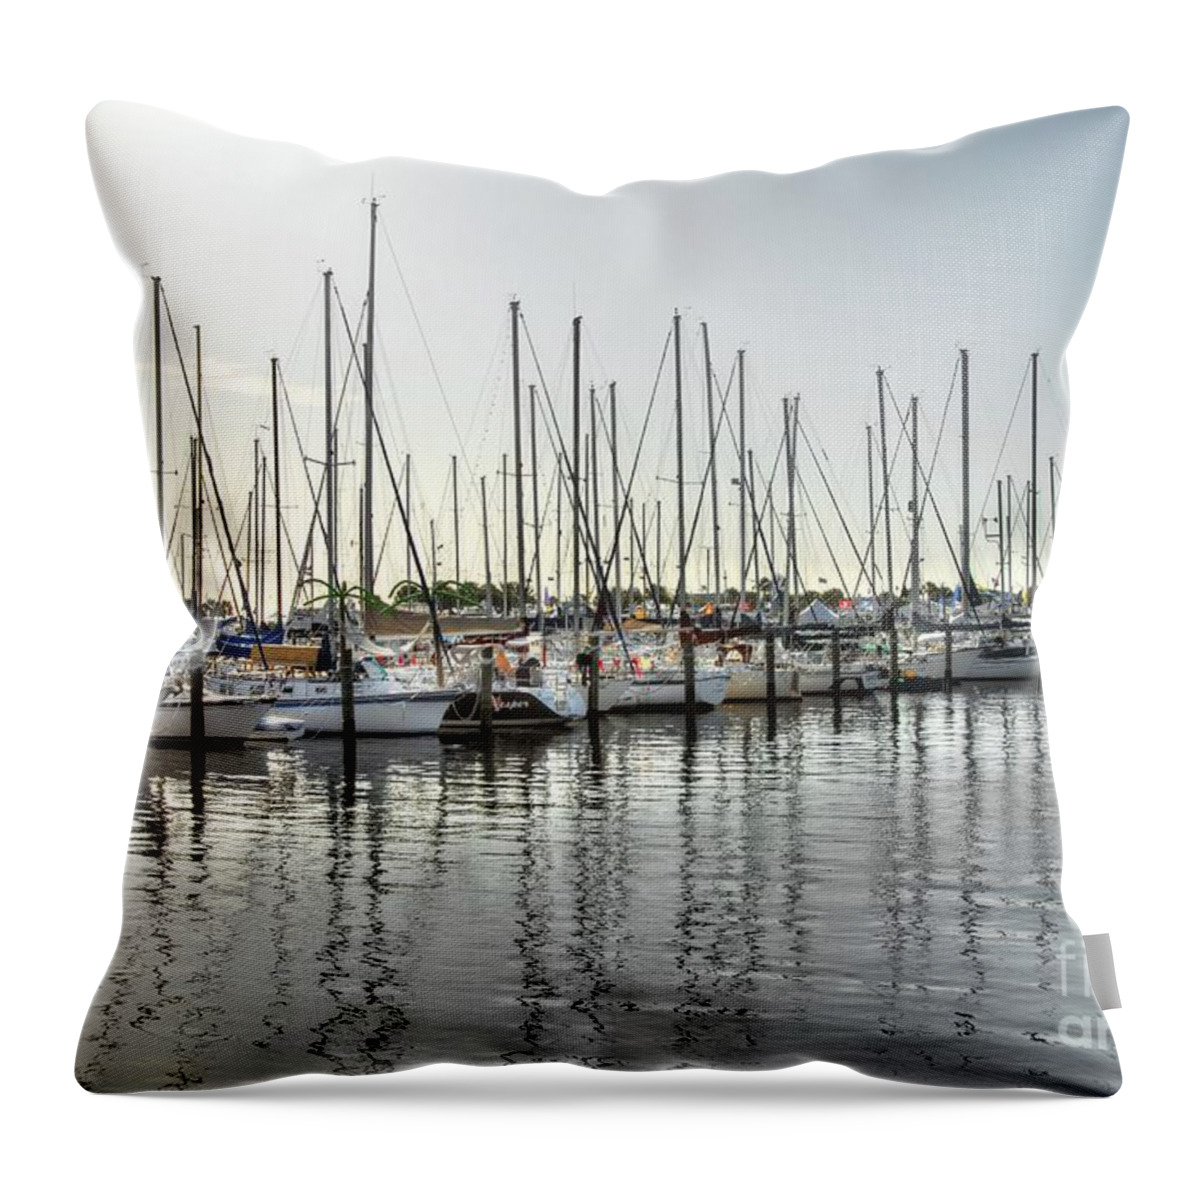 Boats Throw Pillow featuring the photograph The Trail To Water by Anthony Wilkening